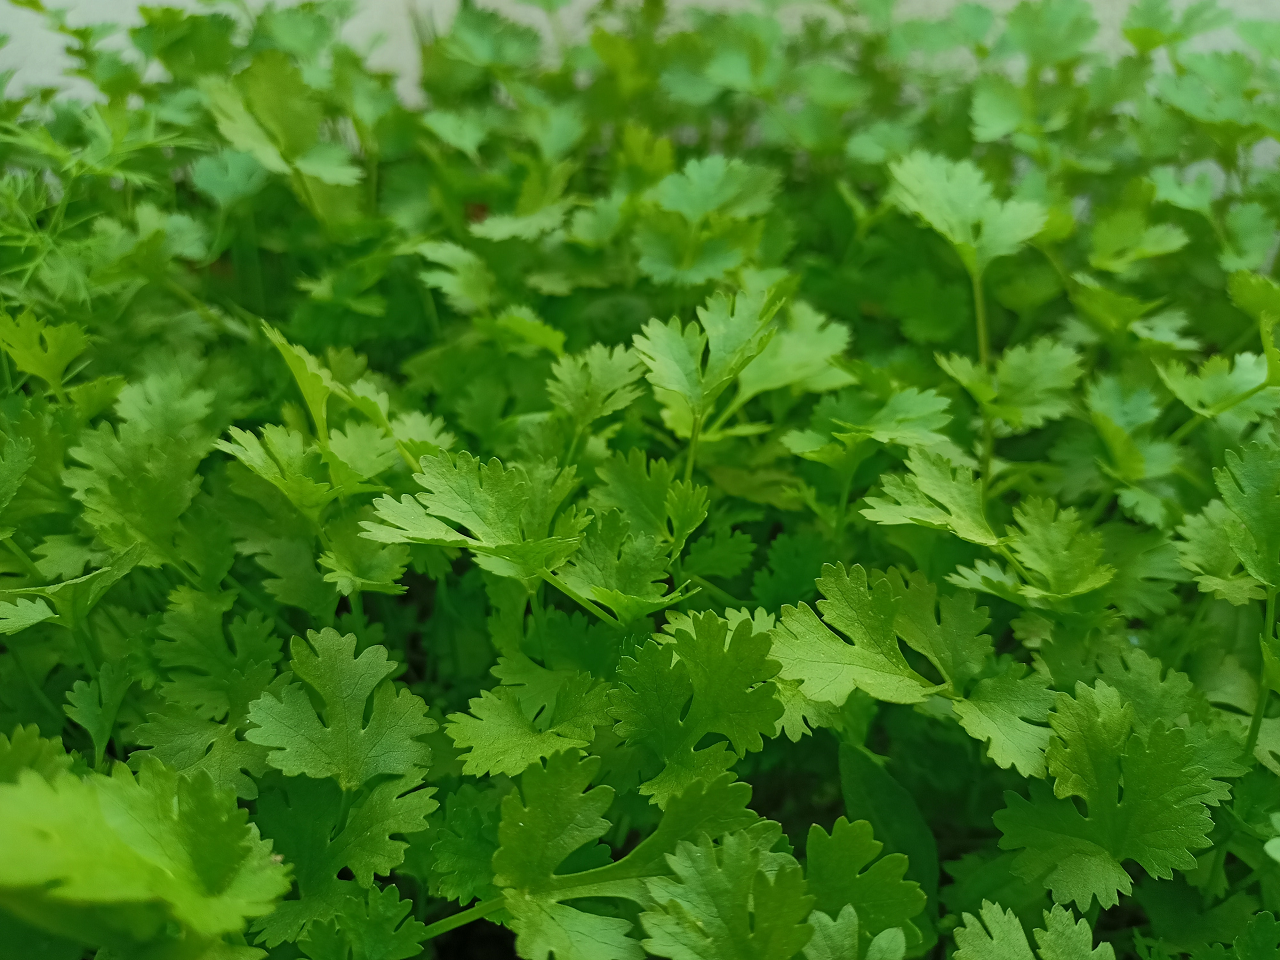 Close up image of parsley leaves.